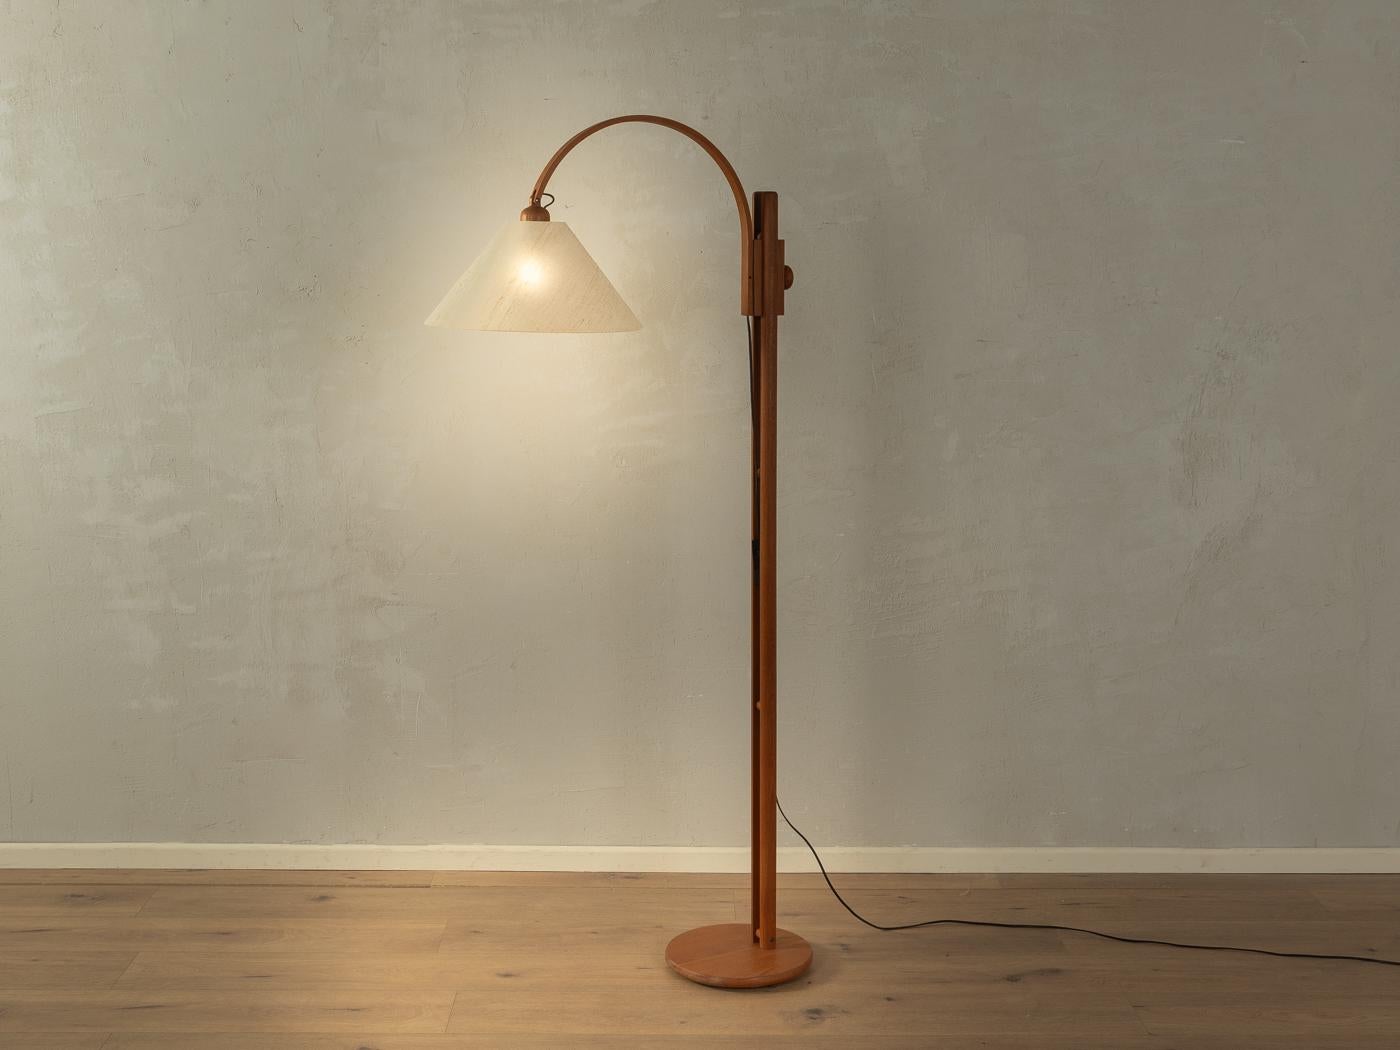 Wonderful floor lamp from the 1960s in Scandinavian Design. Frame and base made of teak wood with a cream white lampshade.

Quality Features:

very good workmanship
high-quality materials
Made in Germany, manufacturer: DOMUS

